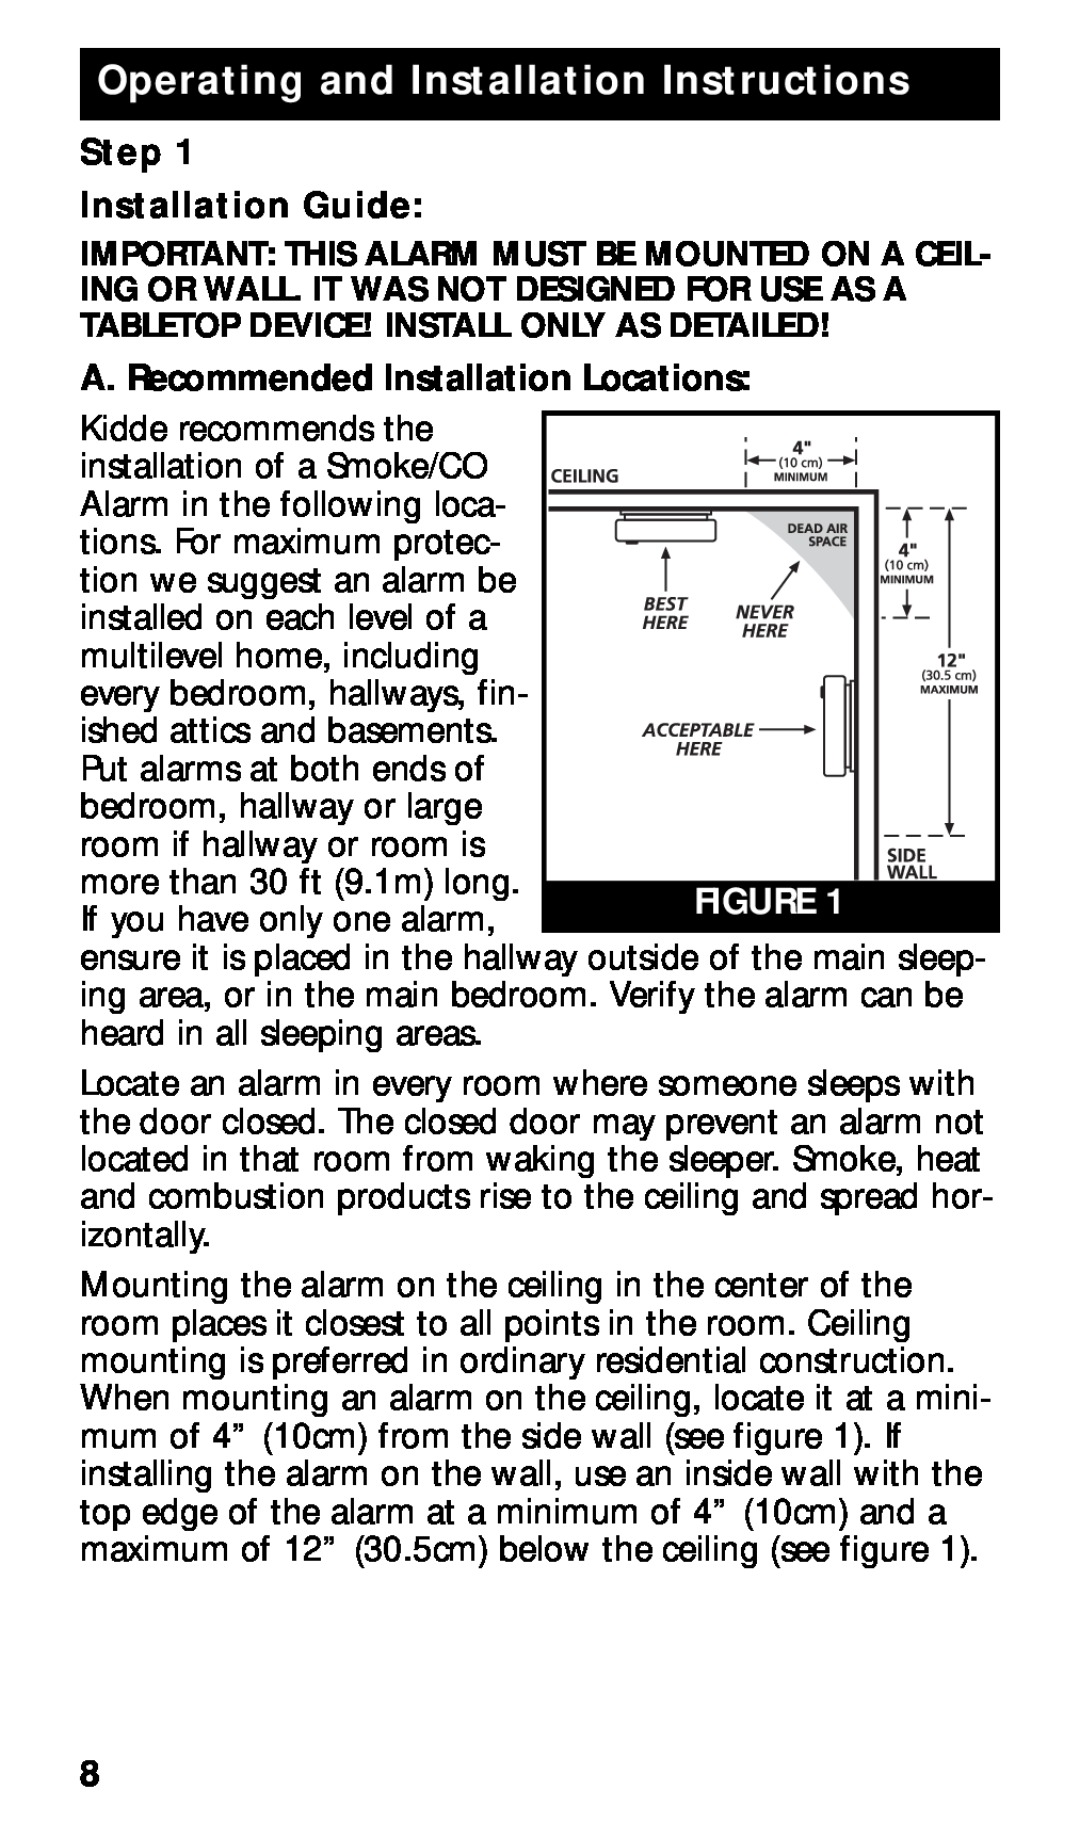 Kidde KN-COPE-I Operating and Installation Instructions, Step Installation Guide, A. Recommended Installation Locations 